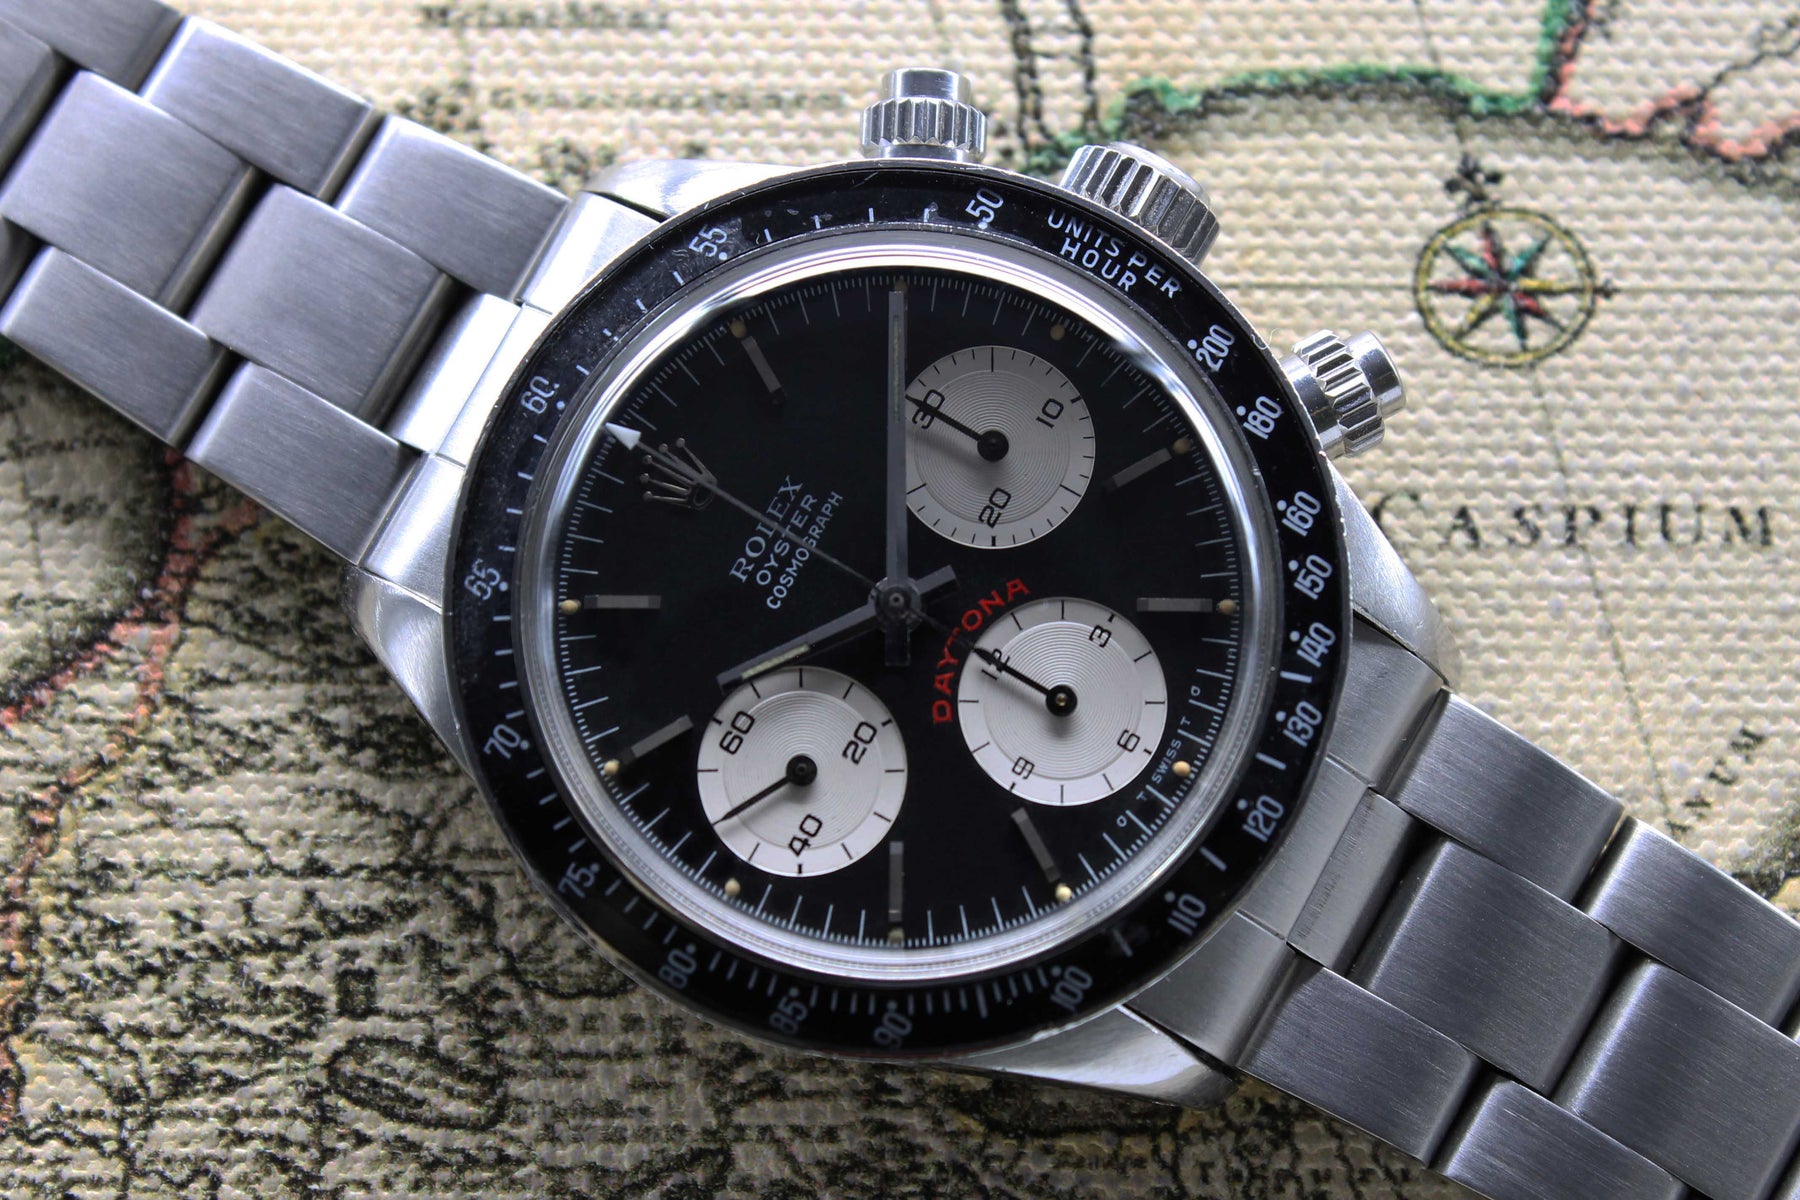 Rolex Daytona 'Big Red Sigma' Ref. 6263 Year 1973 (with Box & Papers)